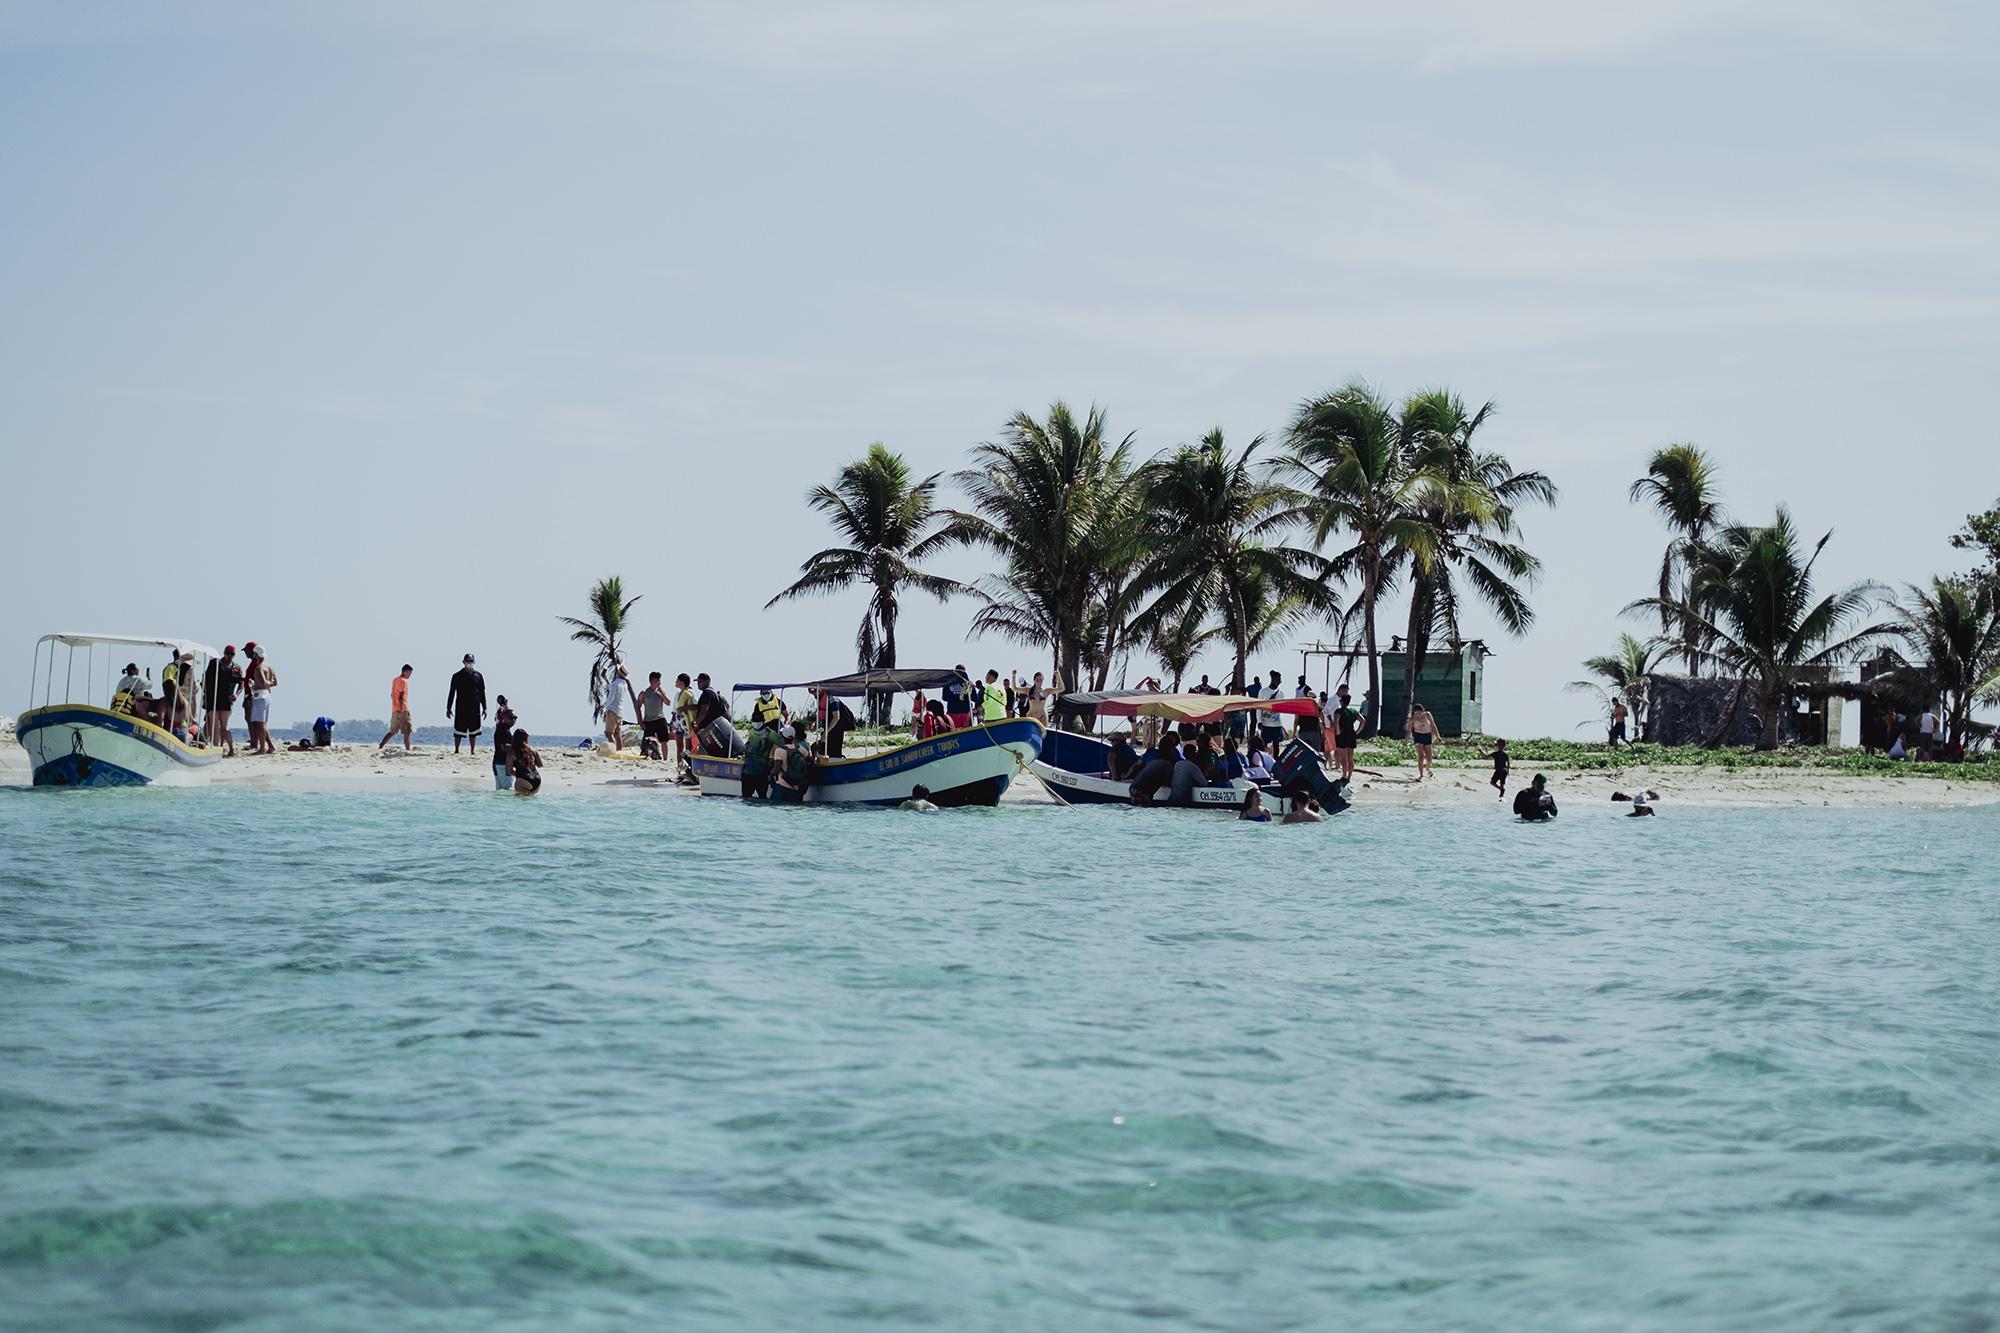 Tour agencies take visitors in motorboats to all of the cays. The first stop is Cayo Bolaños, which for years offered a reprieve from the salt and sun to Garifuna fishermen. Photo: Carlos Barrera/El Faro